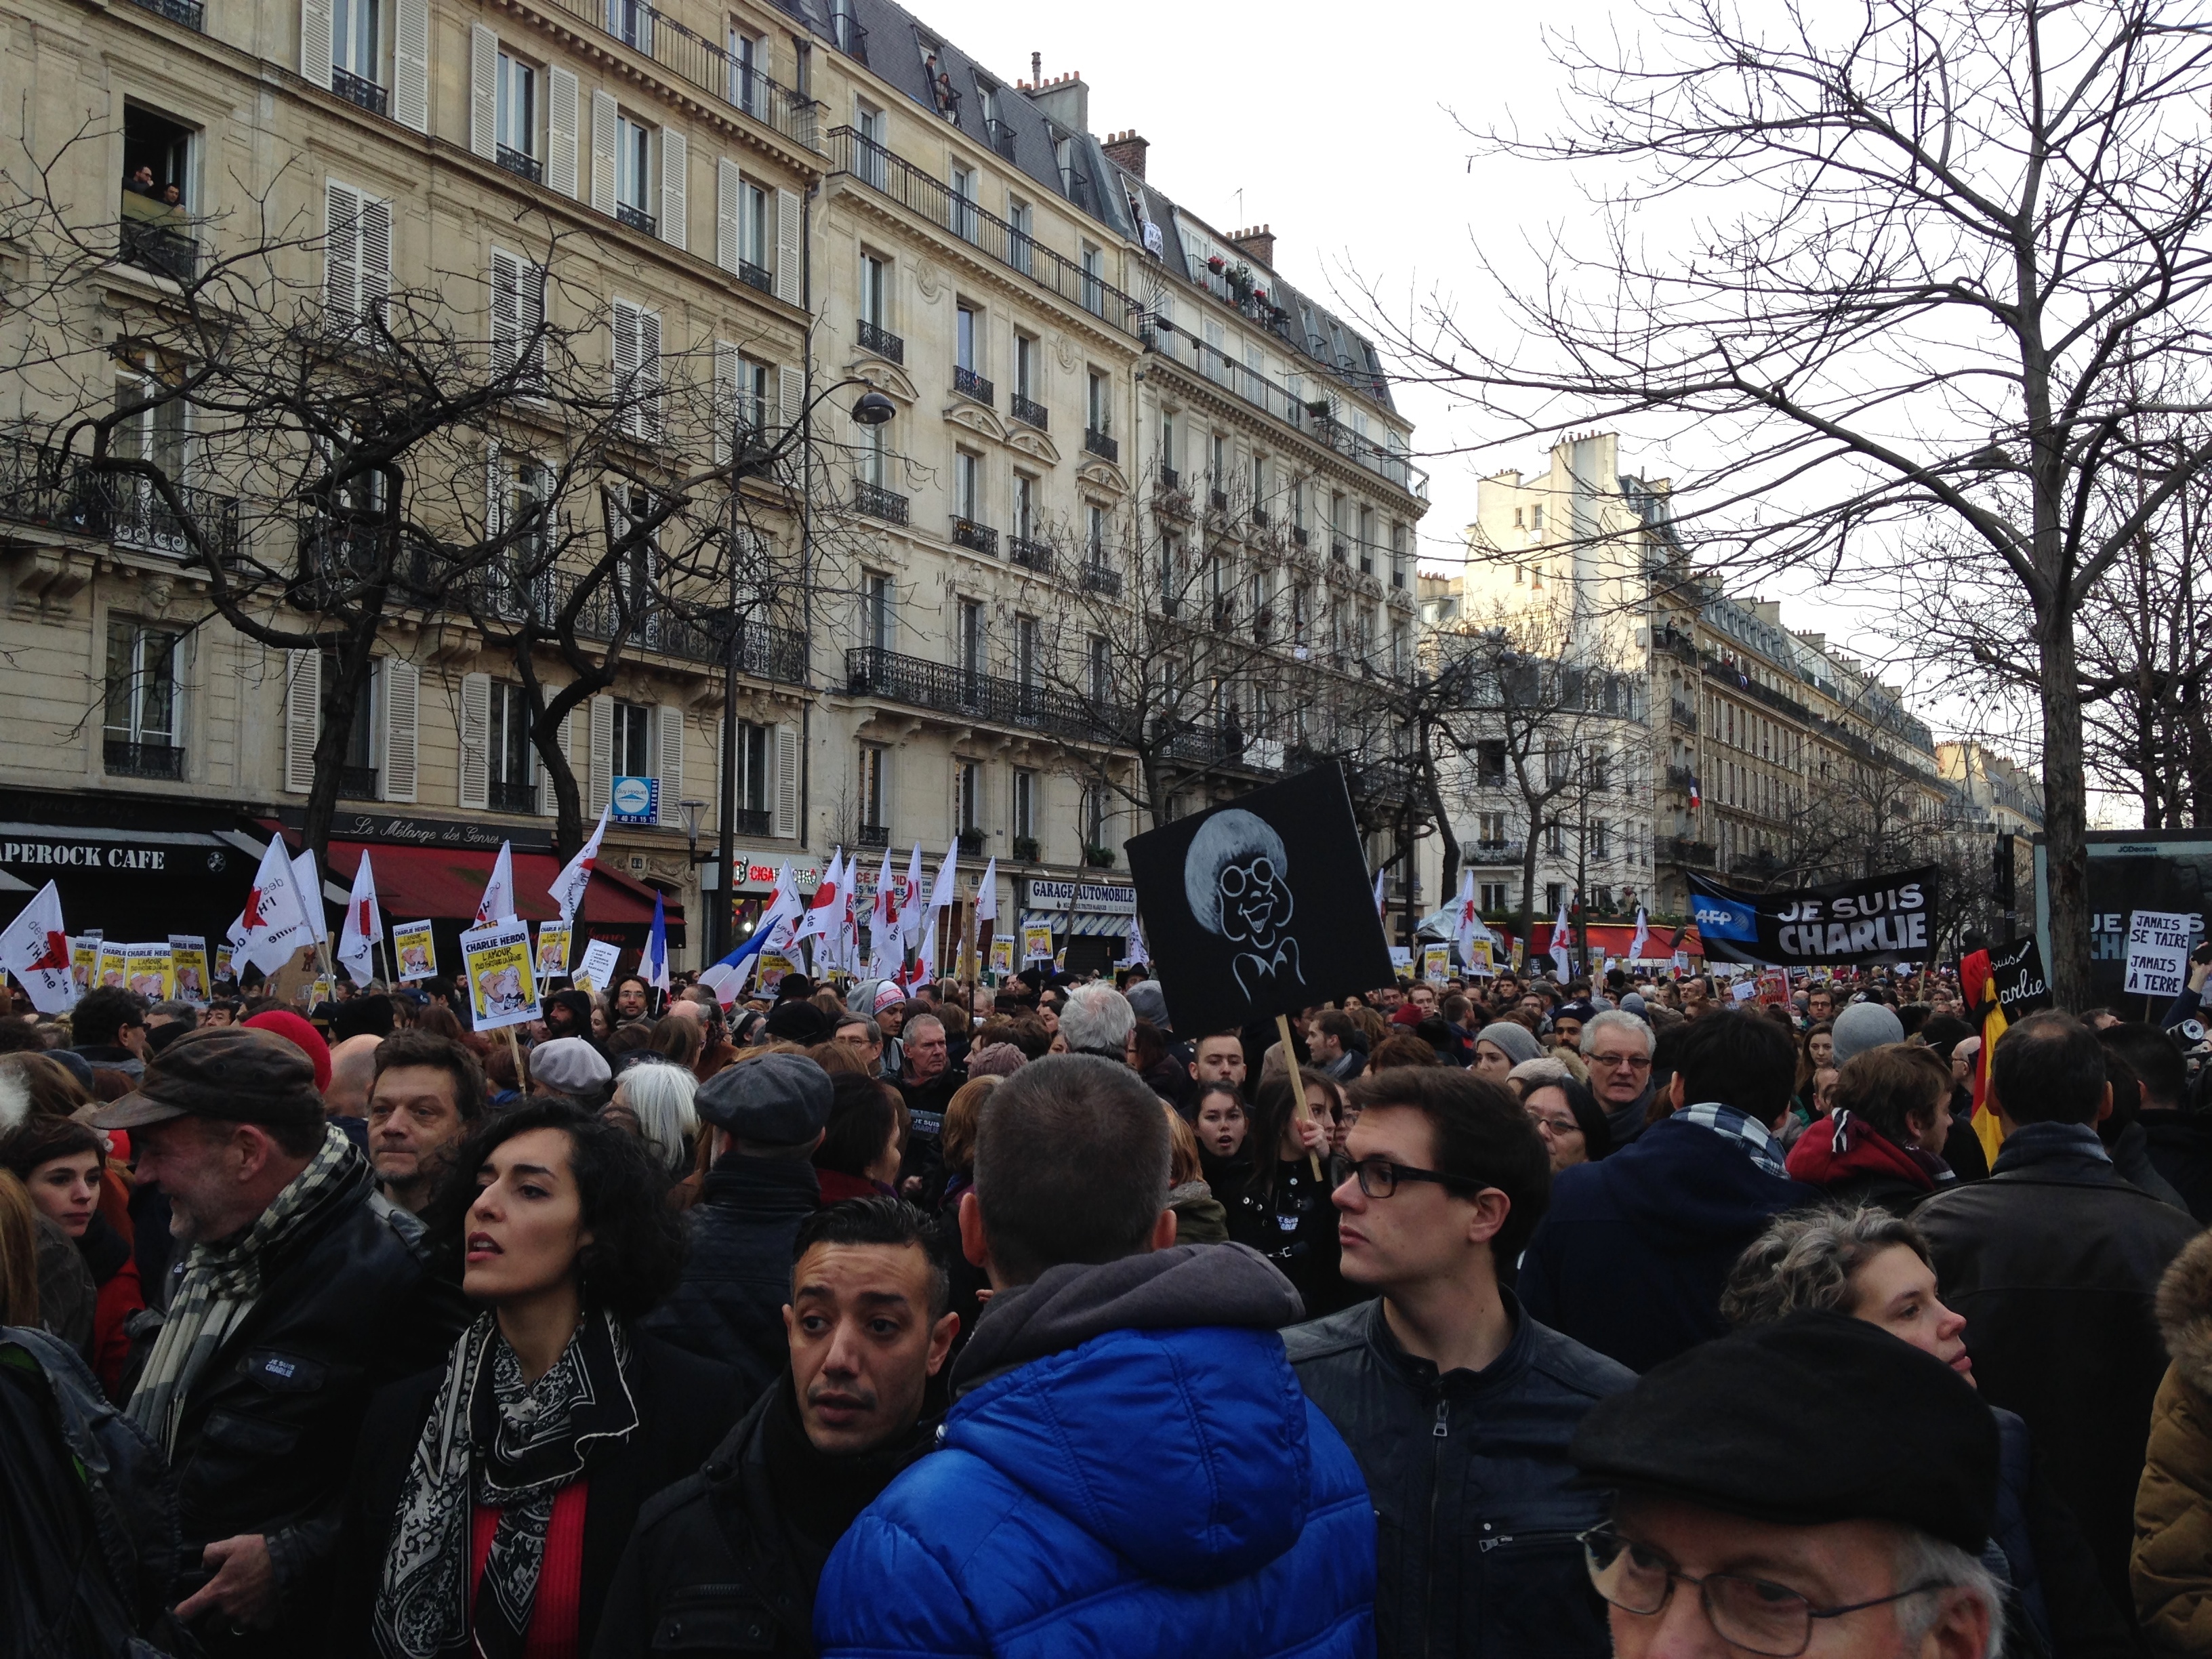 An estimated one million people marched up Boulevard Voltaire in Paris in an act of solidarity after a series of terrorist attacks last week, including an attack on a satire publication that left 12 dead.